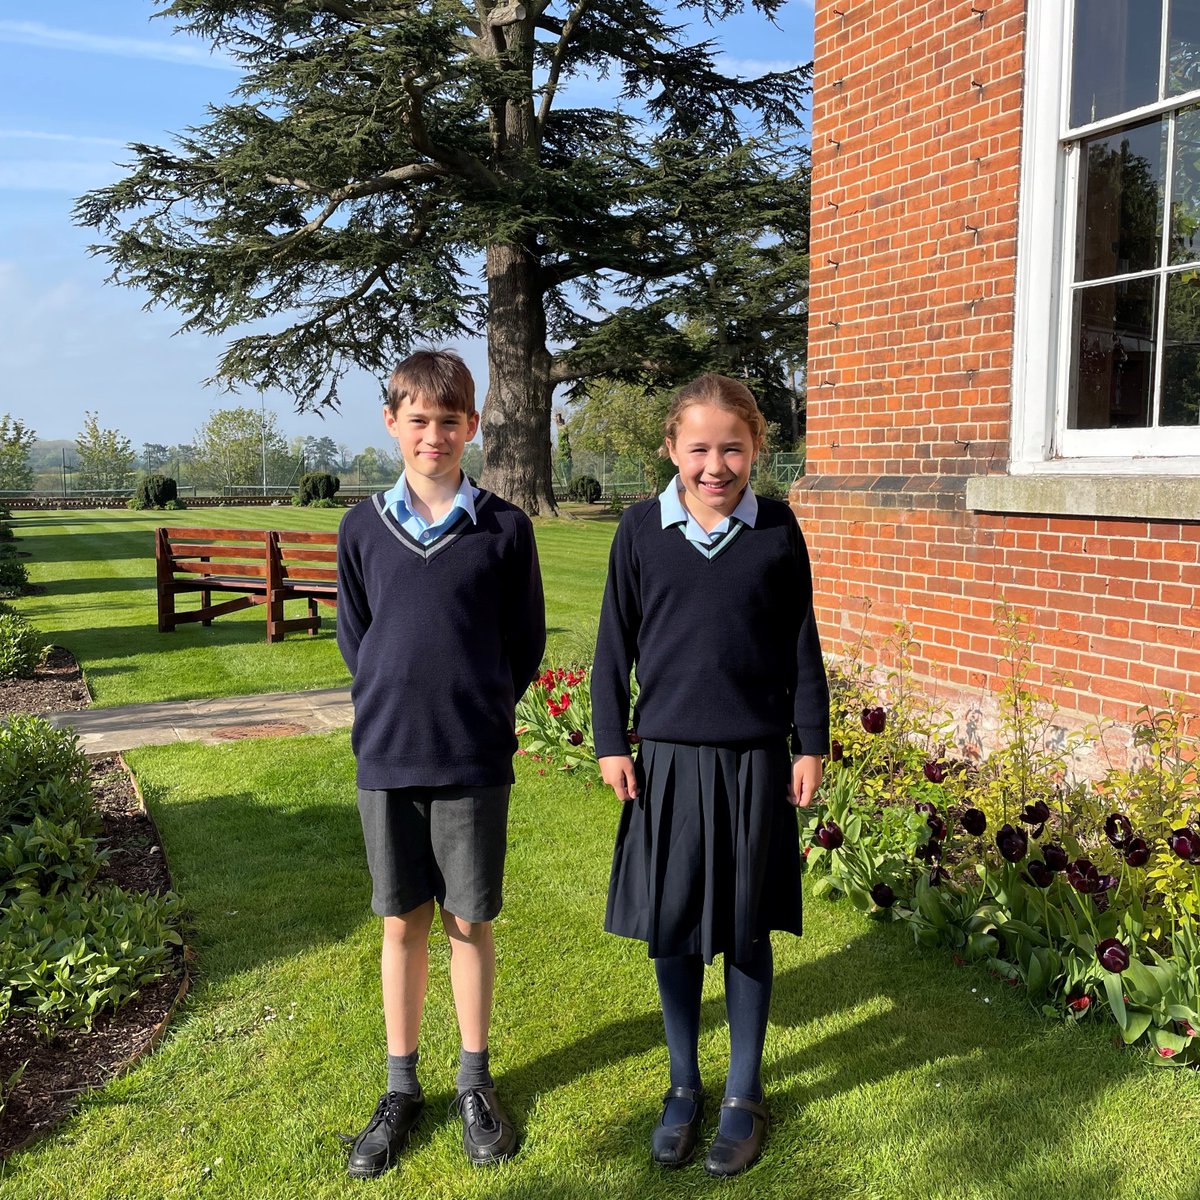 Congratulations to our two swimmers who have qualified for the @iapsuksport Swimming Finals at the @AquaticsCentre on 8th June. 👏🏊 #oldbuckenhamhallschool #swimmers #londonaquaticscentre #prepschool #suffolkprepschool #suffolkswimming #prepschoolswimming